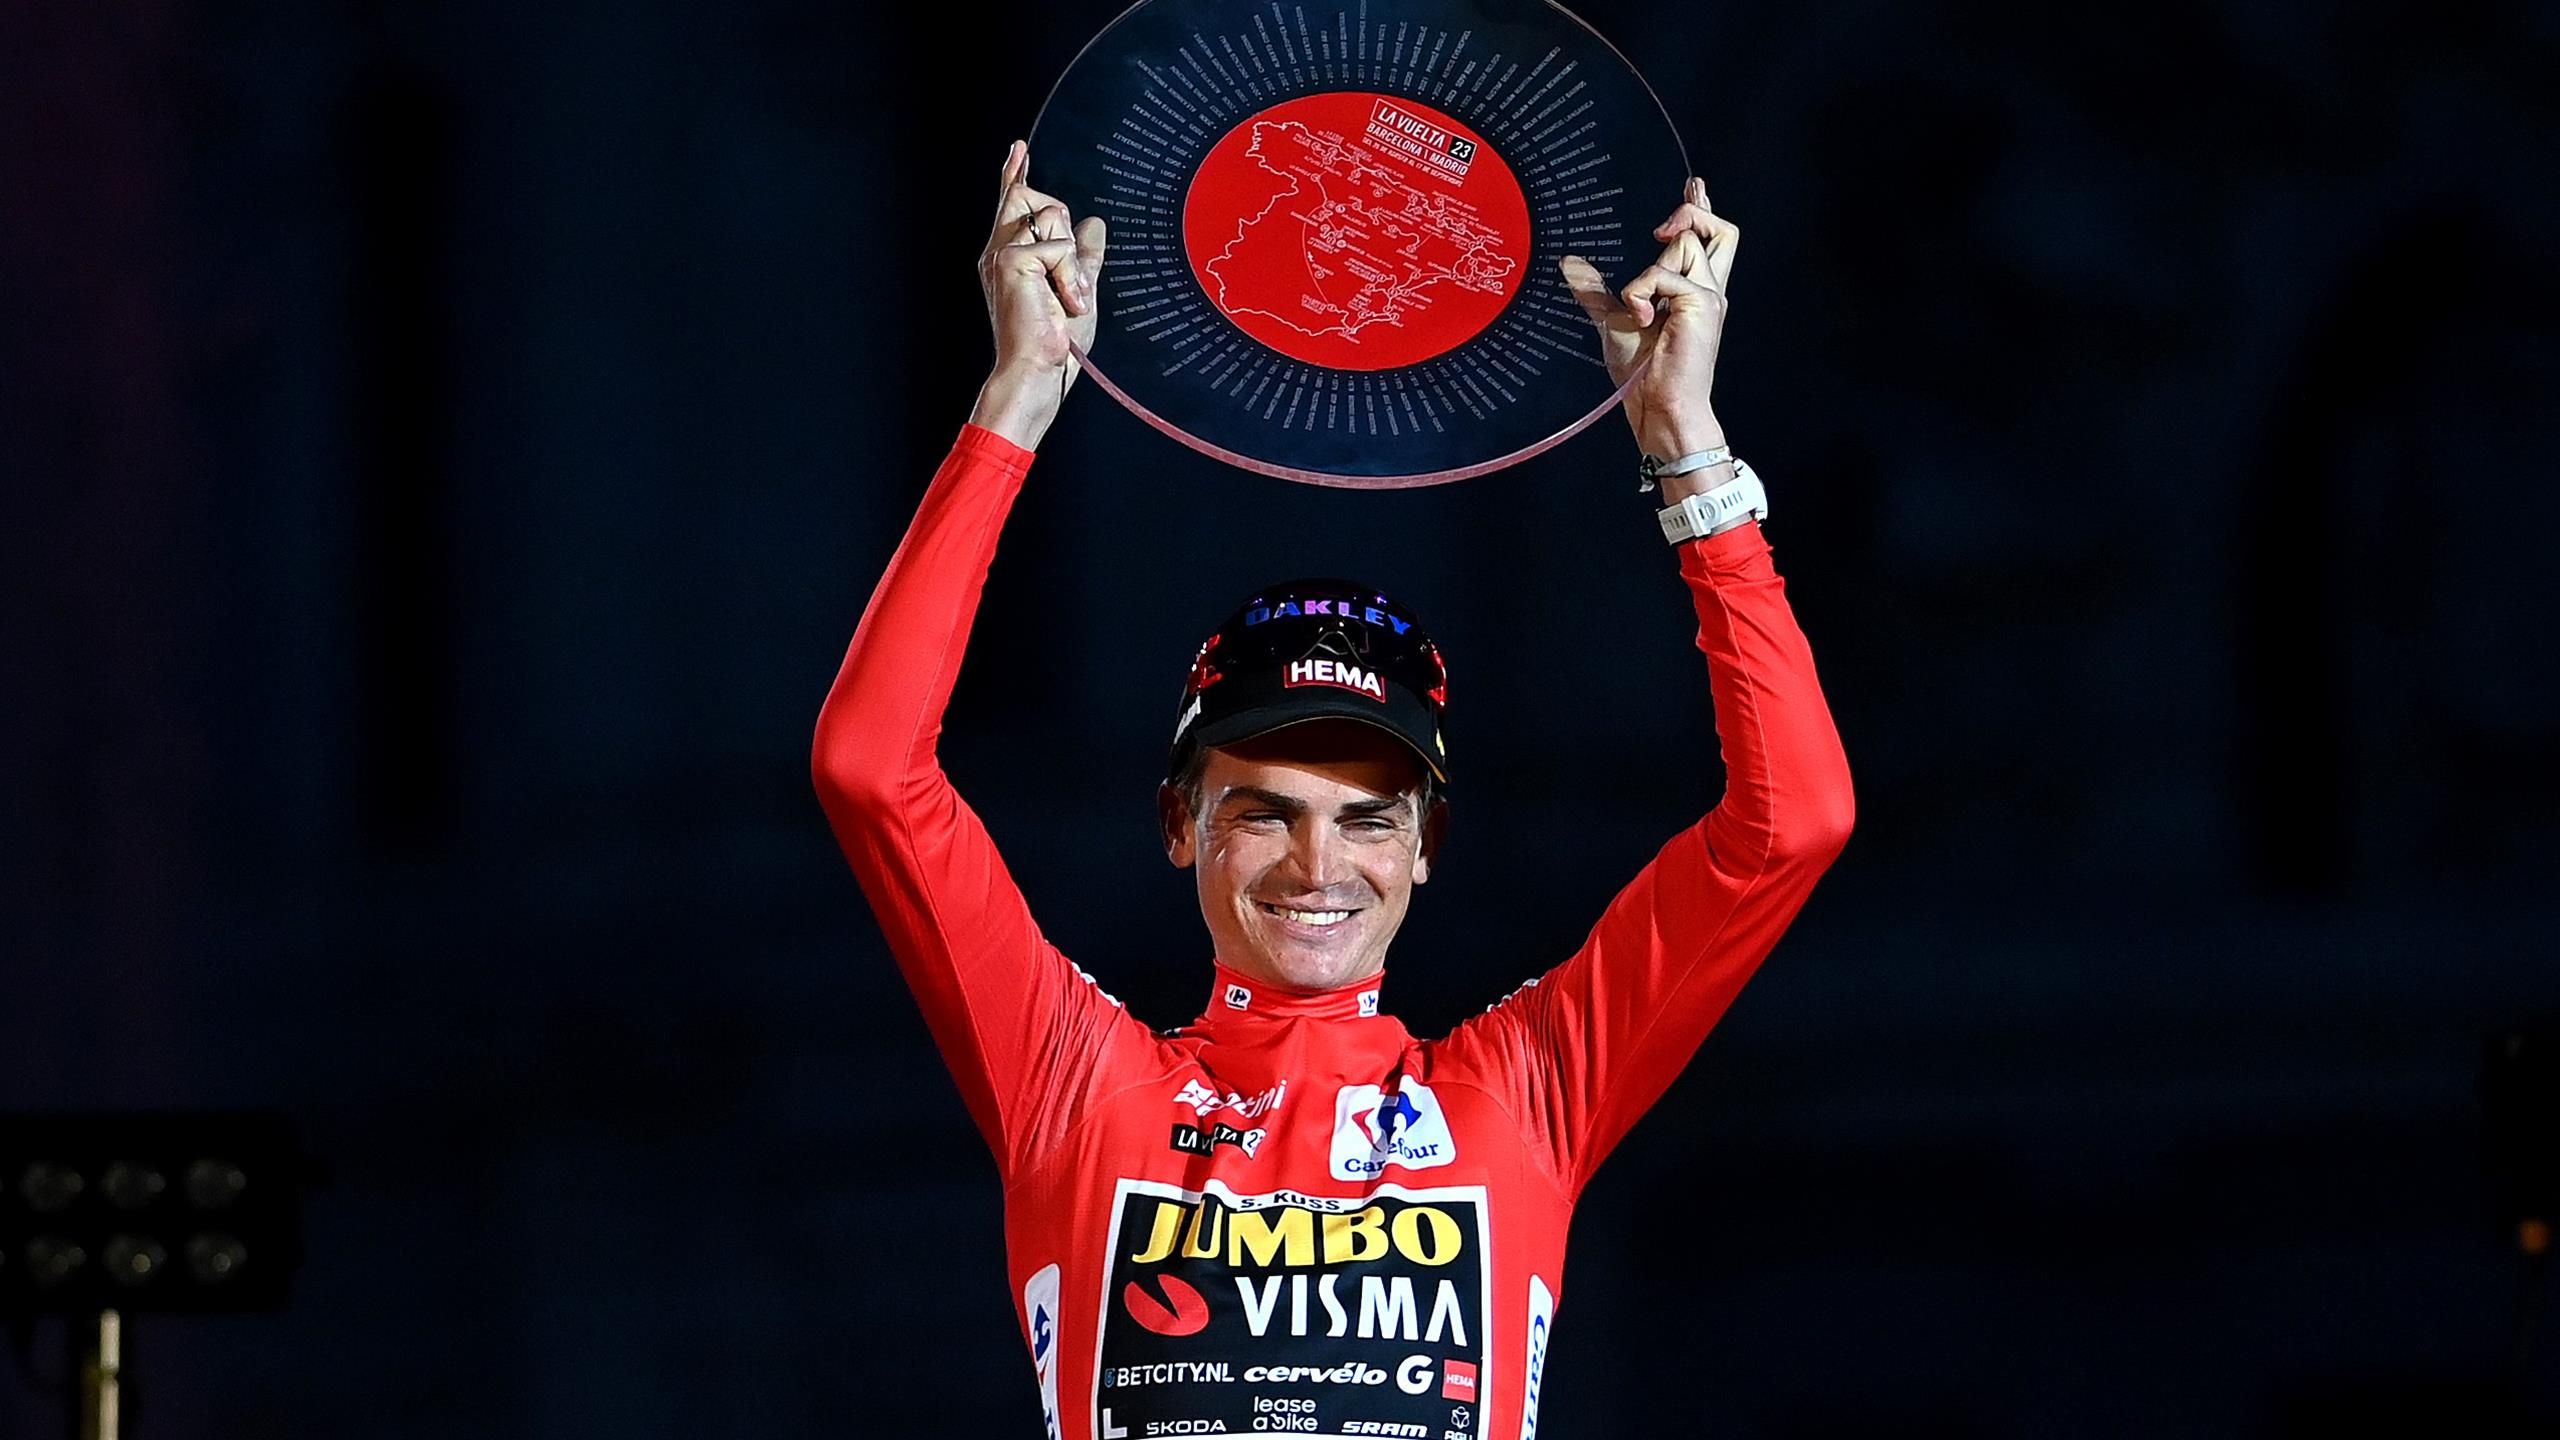 Vuelta: Sepp Kuss celebrates Jumbo’s historic triple victory – ‘Usually I’m on the other side’